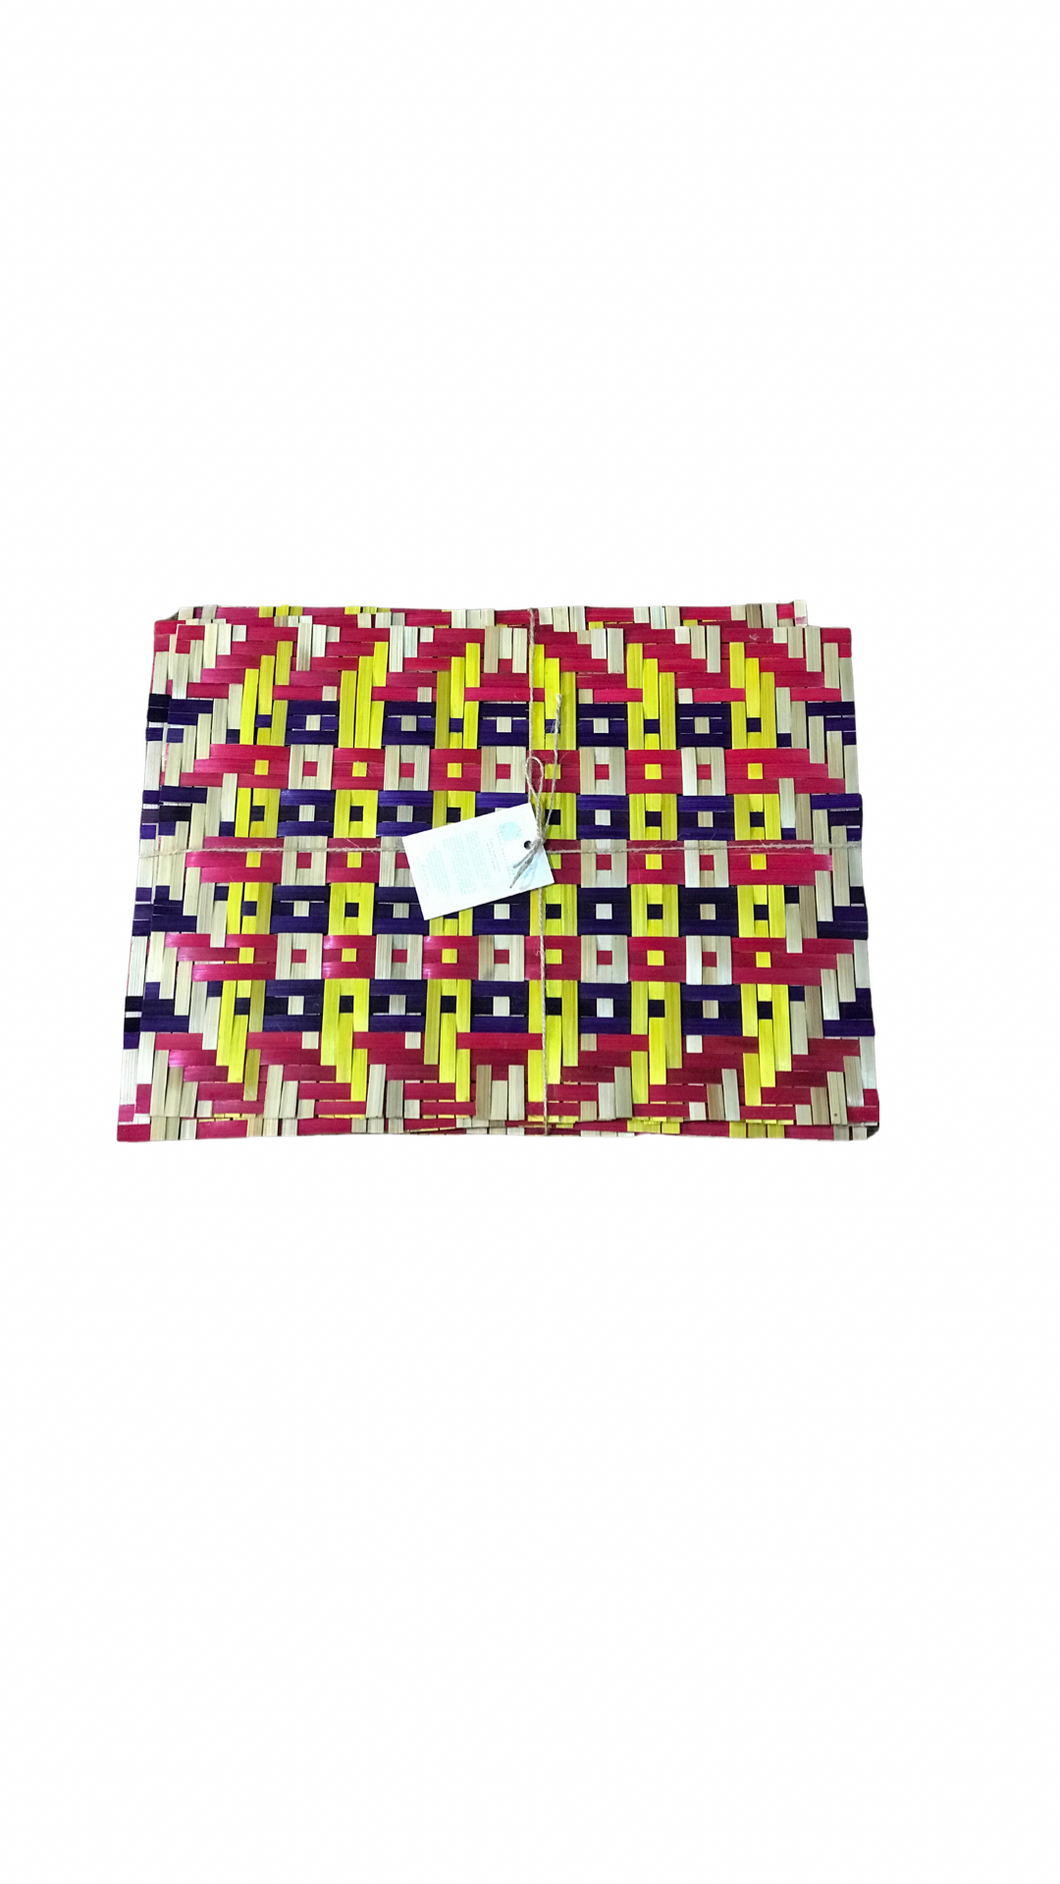 Handwoven Placemat